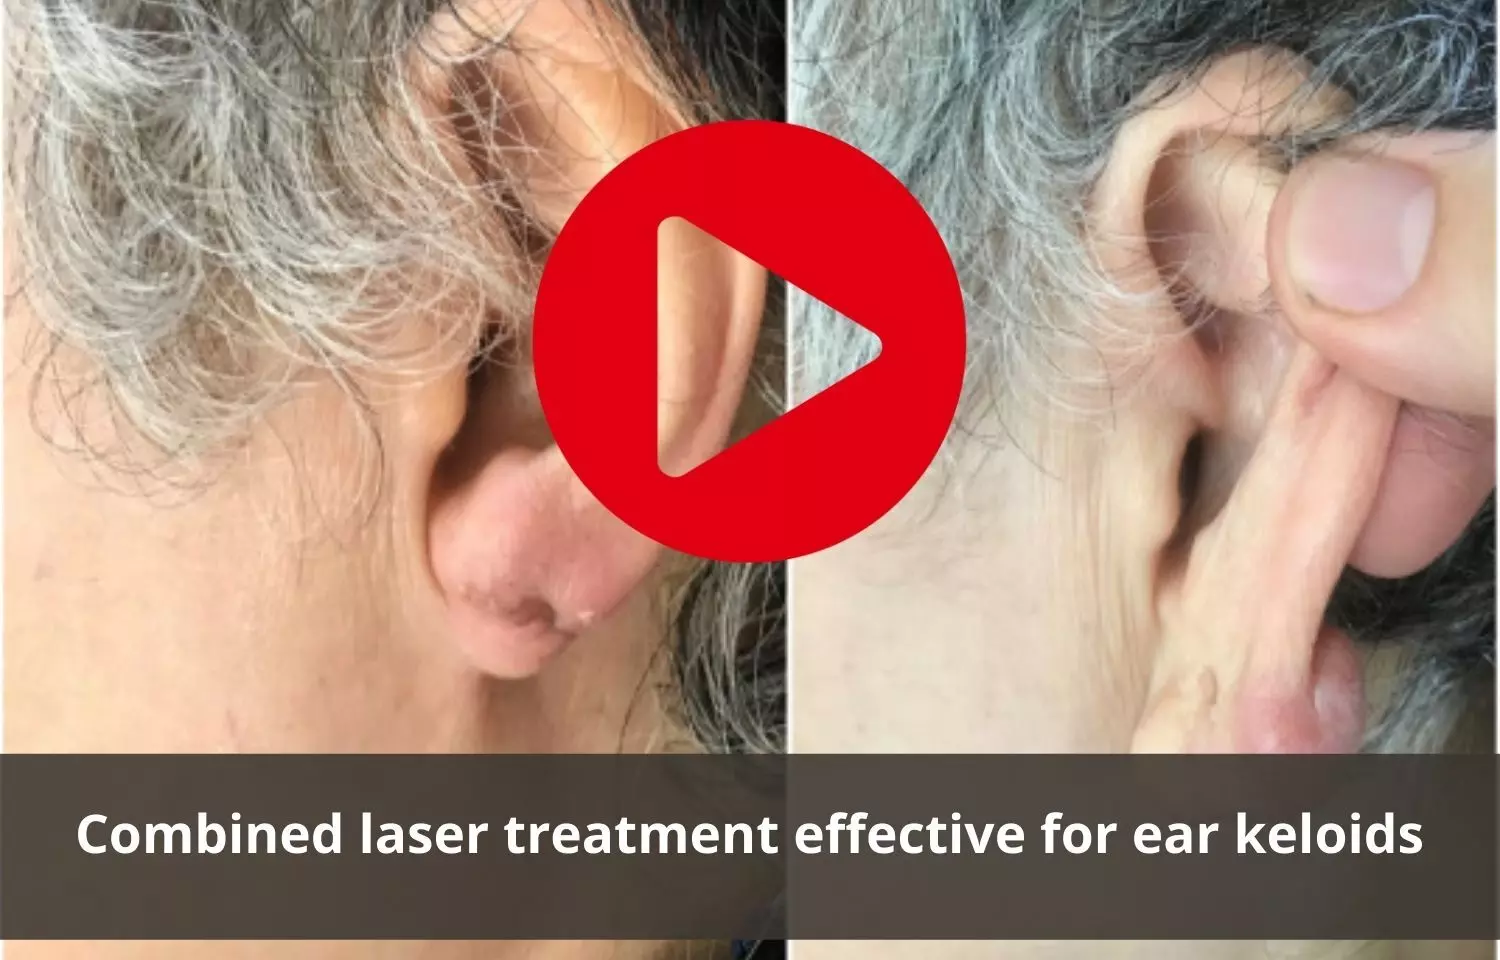 Ear keloids to be treated by combined lasers finds study